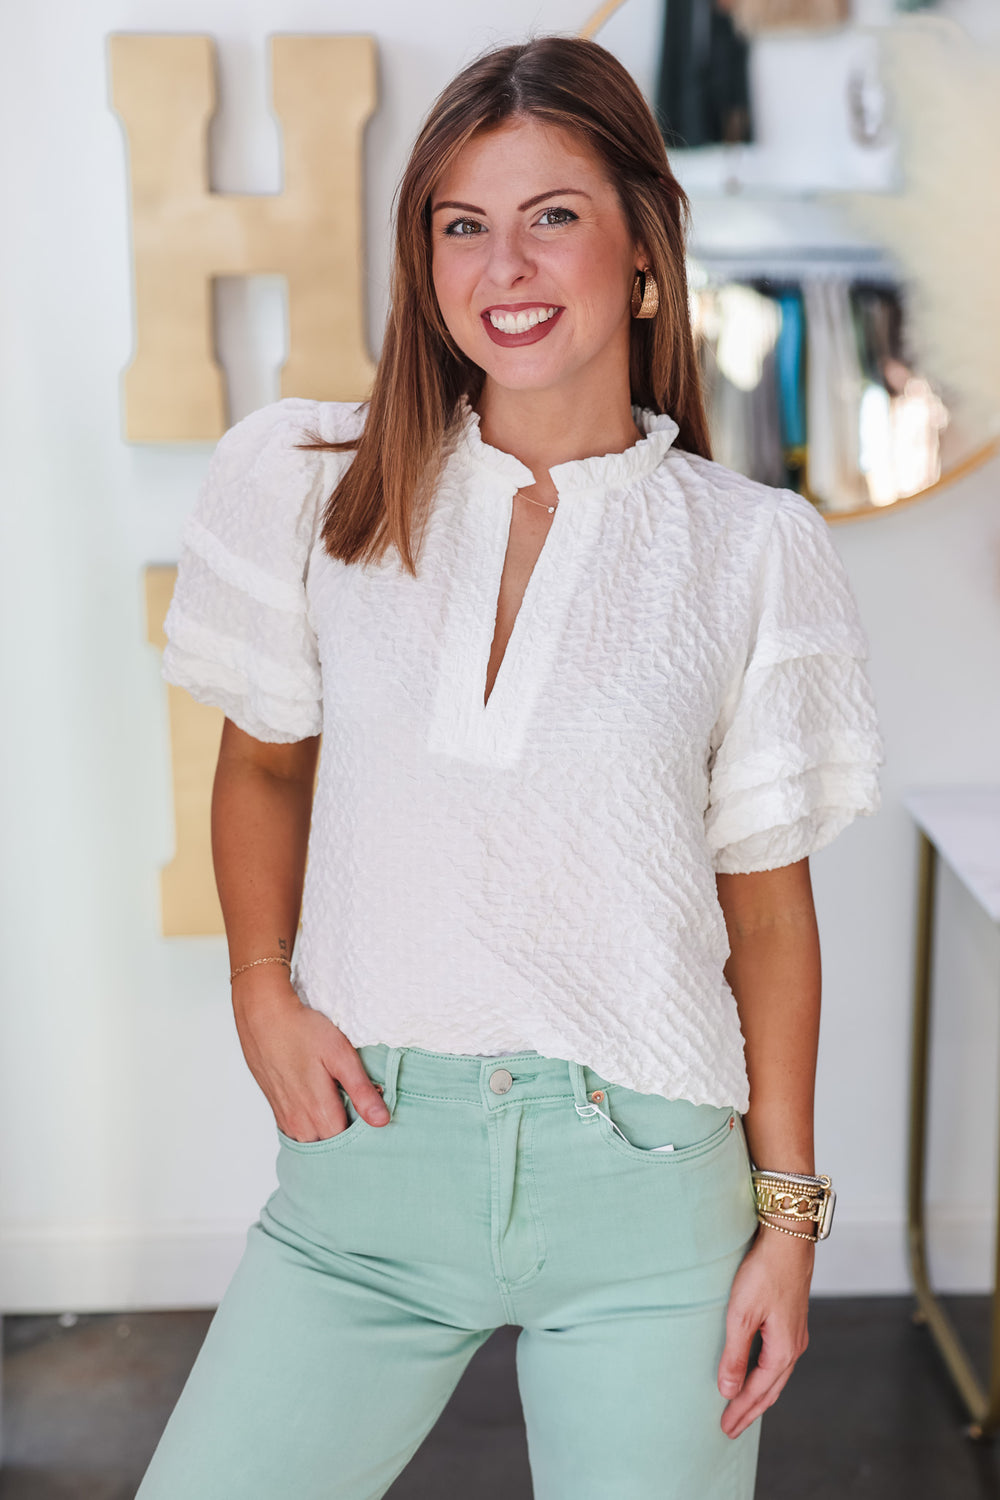 A brunette woman standing in front of a shop wearing a textured short sleeve top with v neck and ruffle collar. She is wearing it with mint colored jeans.